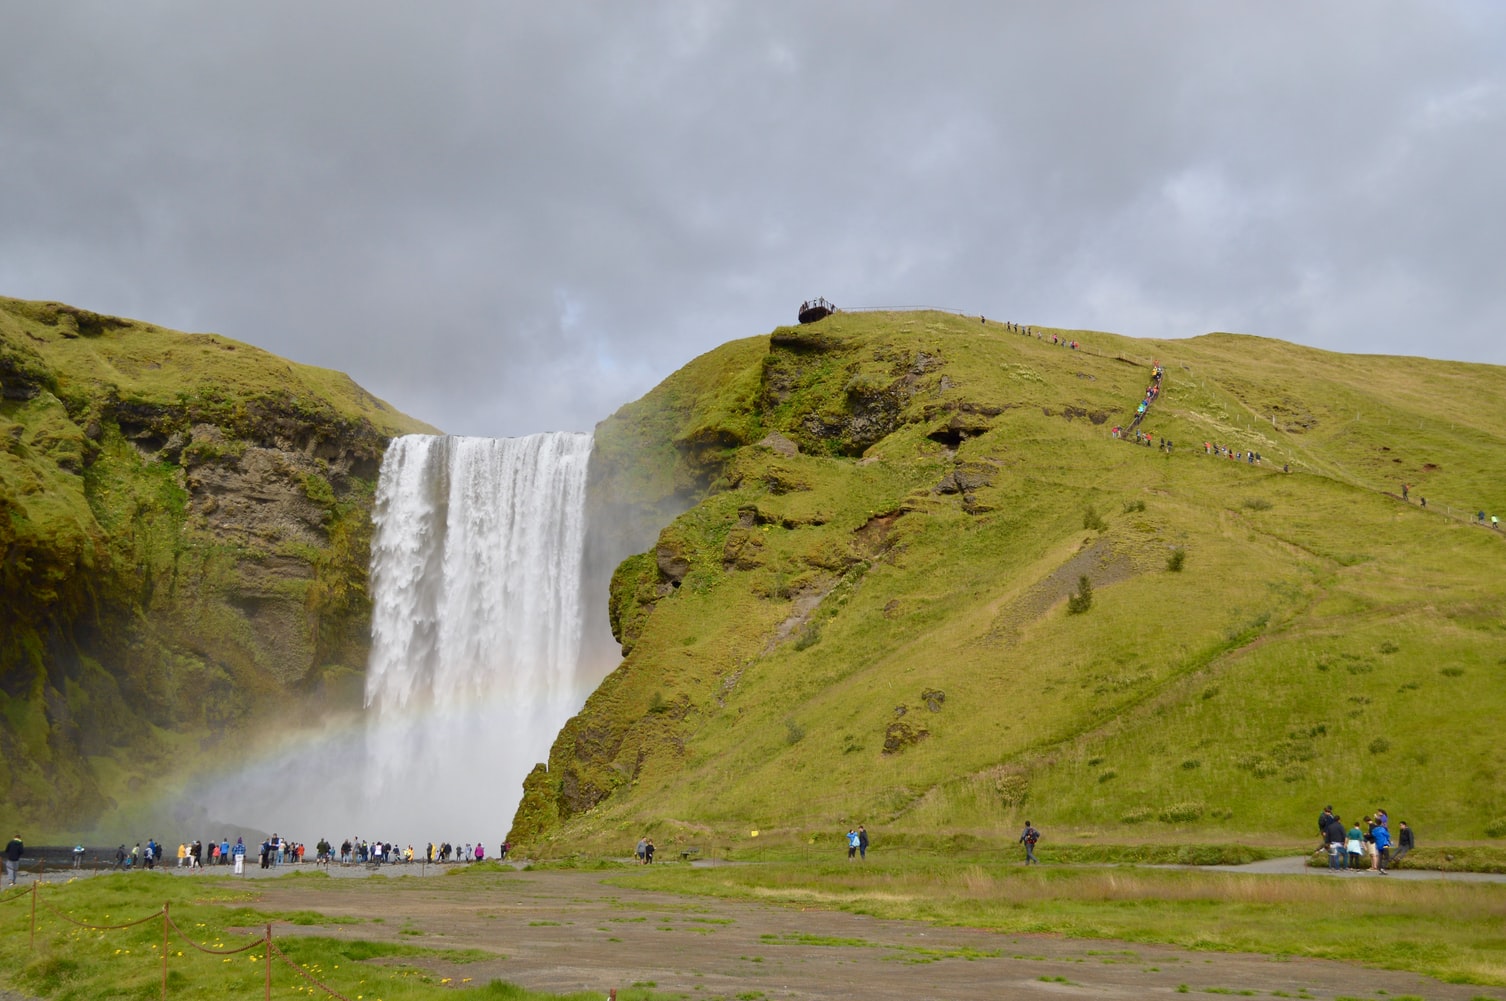 The majesty of Skogafoss Waterfall as crowds look on.